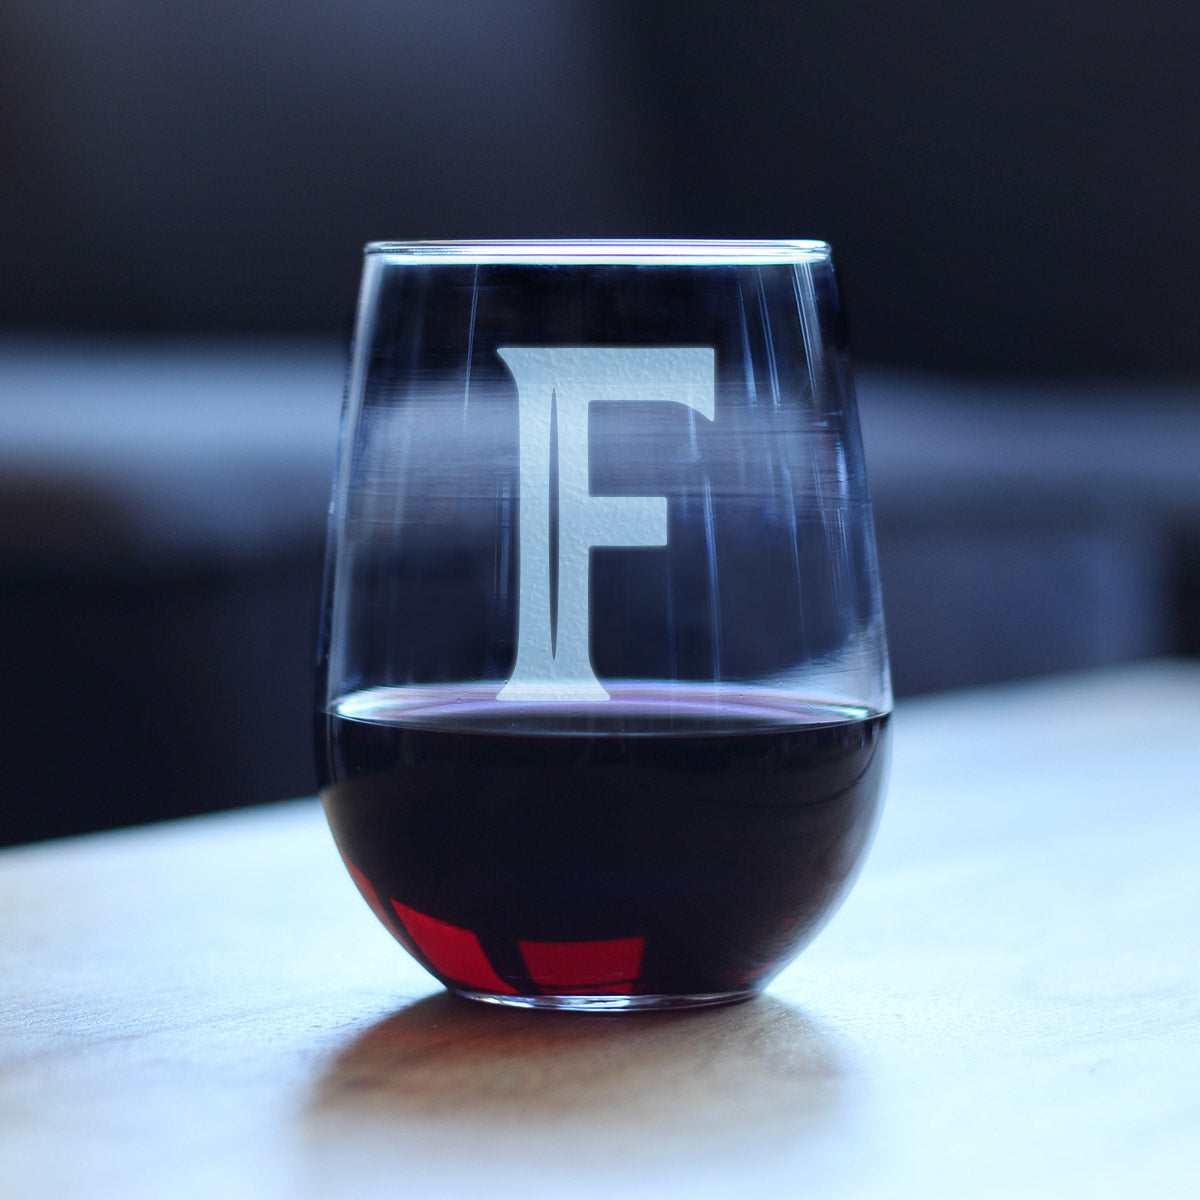 Monogram Bold Letter F - Stemless Wine Glass - Personalized Gifts for Women and Men - Large Engraved Glasses